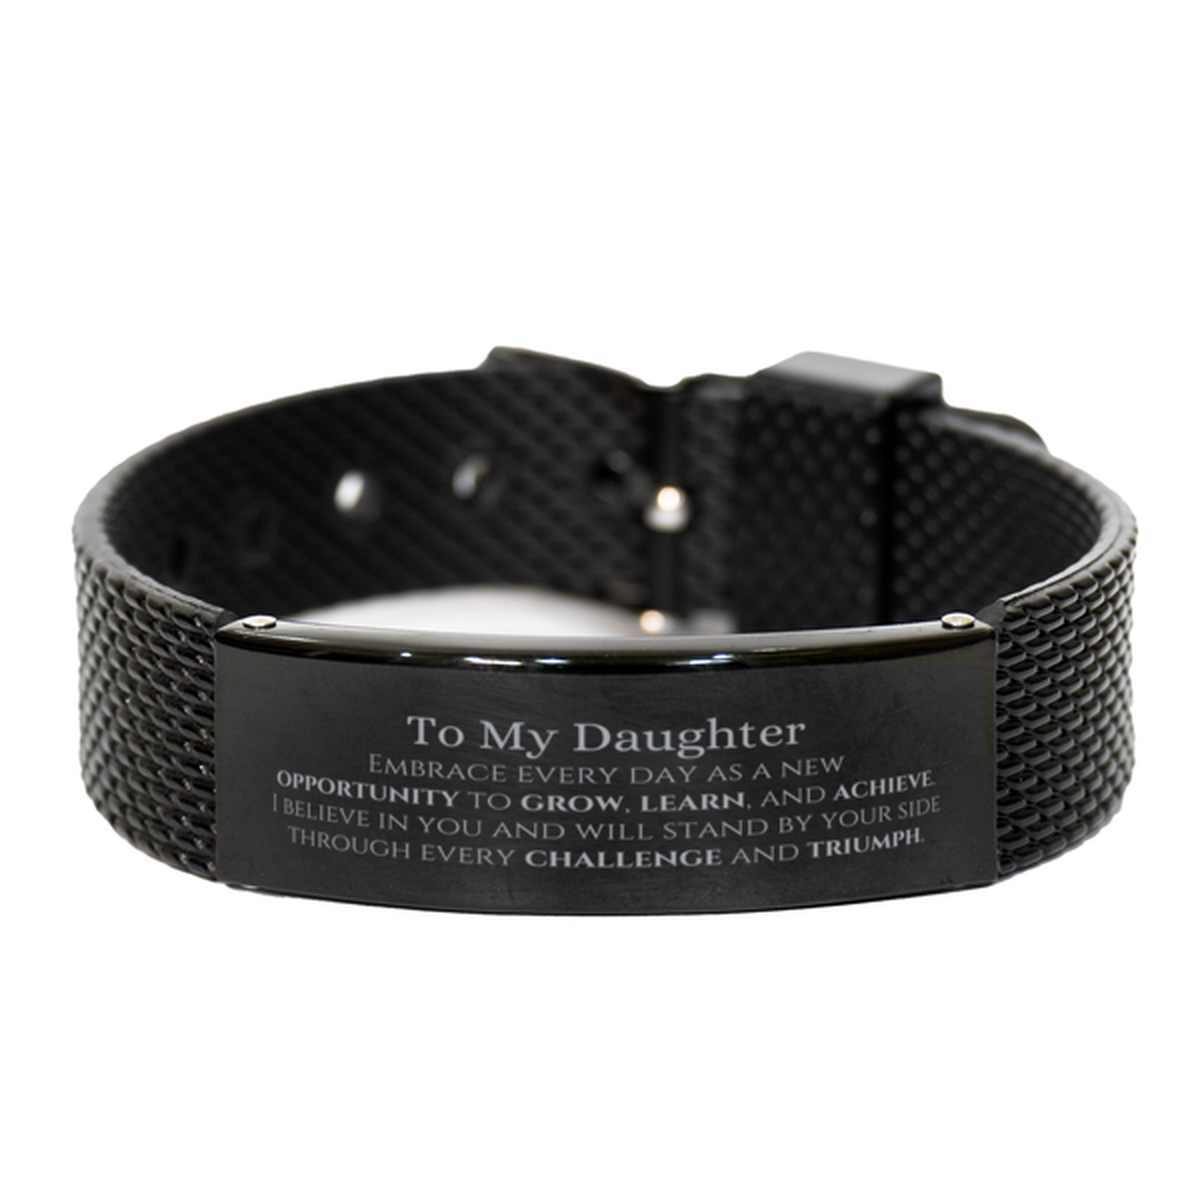 To My Daughter Gifts, I believe in you and will stand by your side, Inspirational Black Shark Mesh Bracelet For Daughter, Birthday Christmas Motivational Daughter Gifts